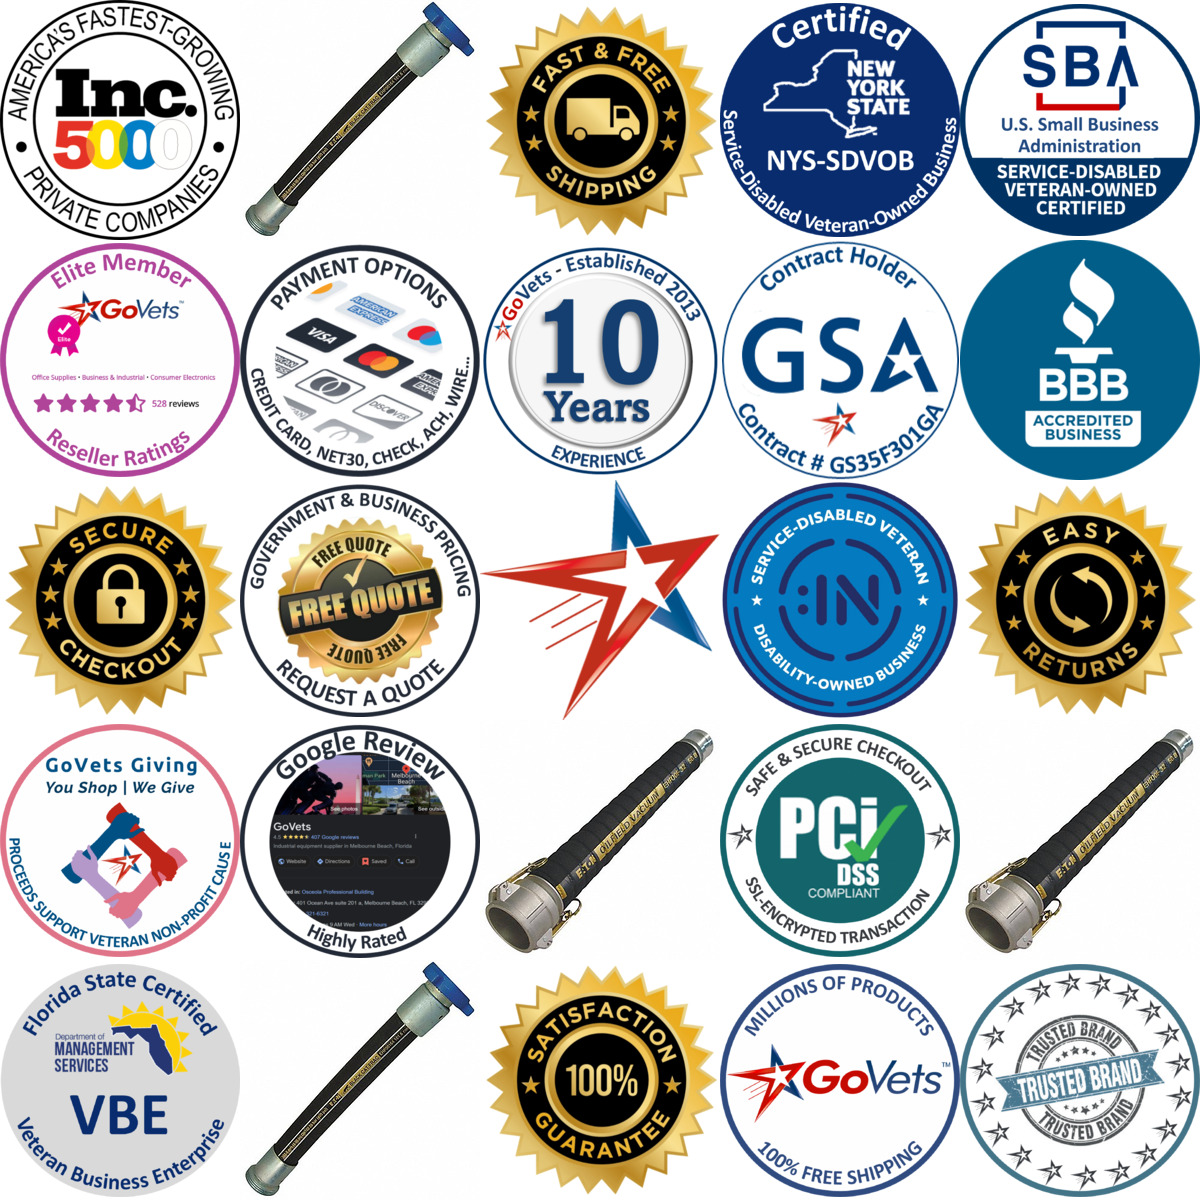 A selection of Oil and Gas Exploration Hose Assemblies products on GoVets